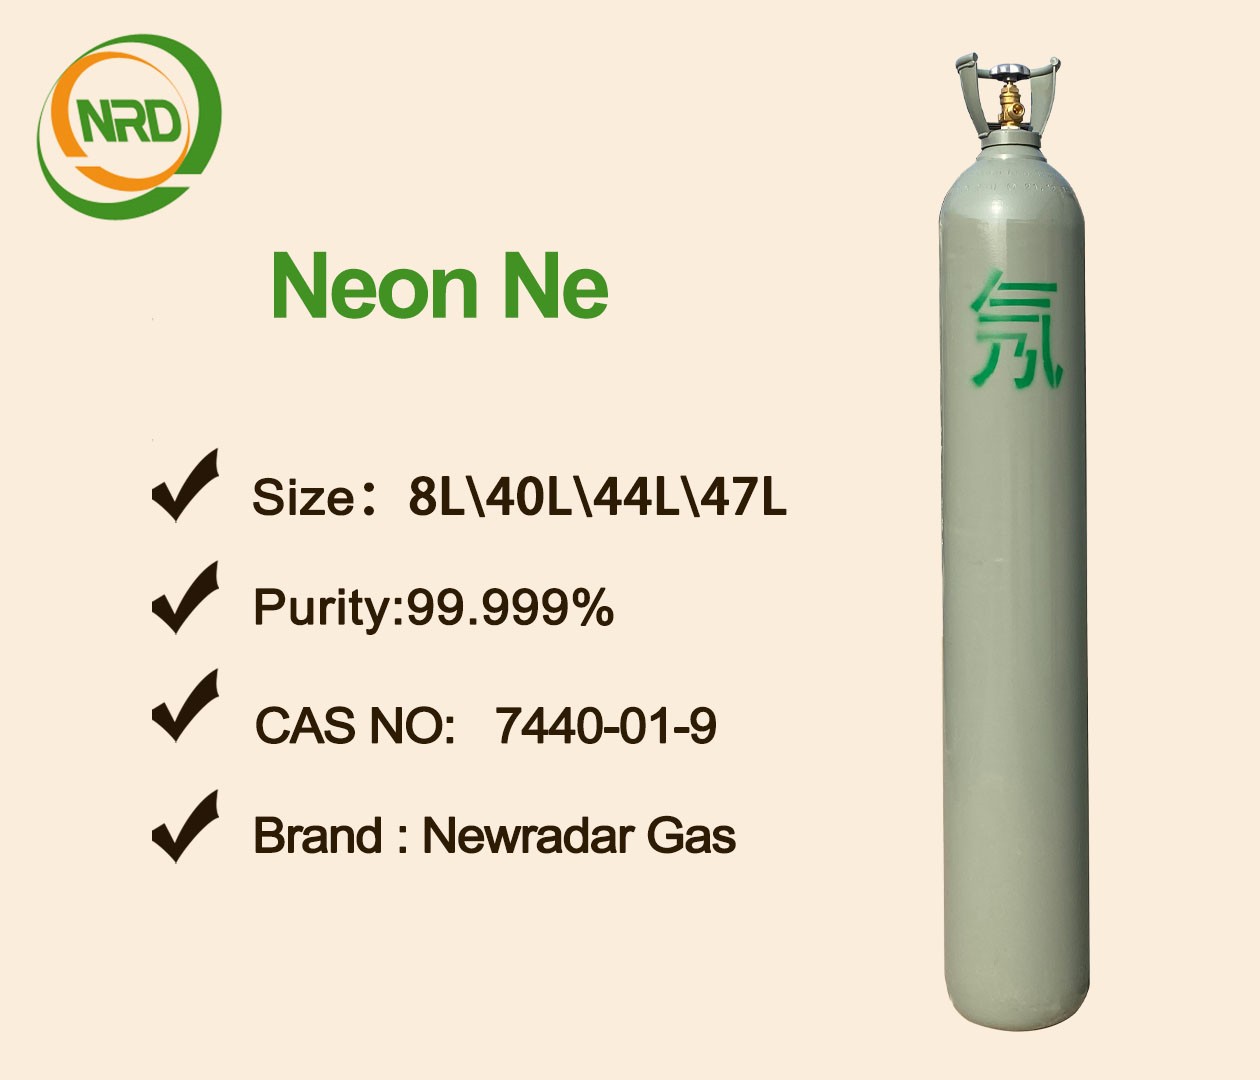 How to pack,store and transport neon gas